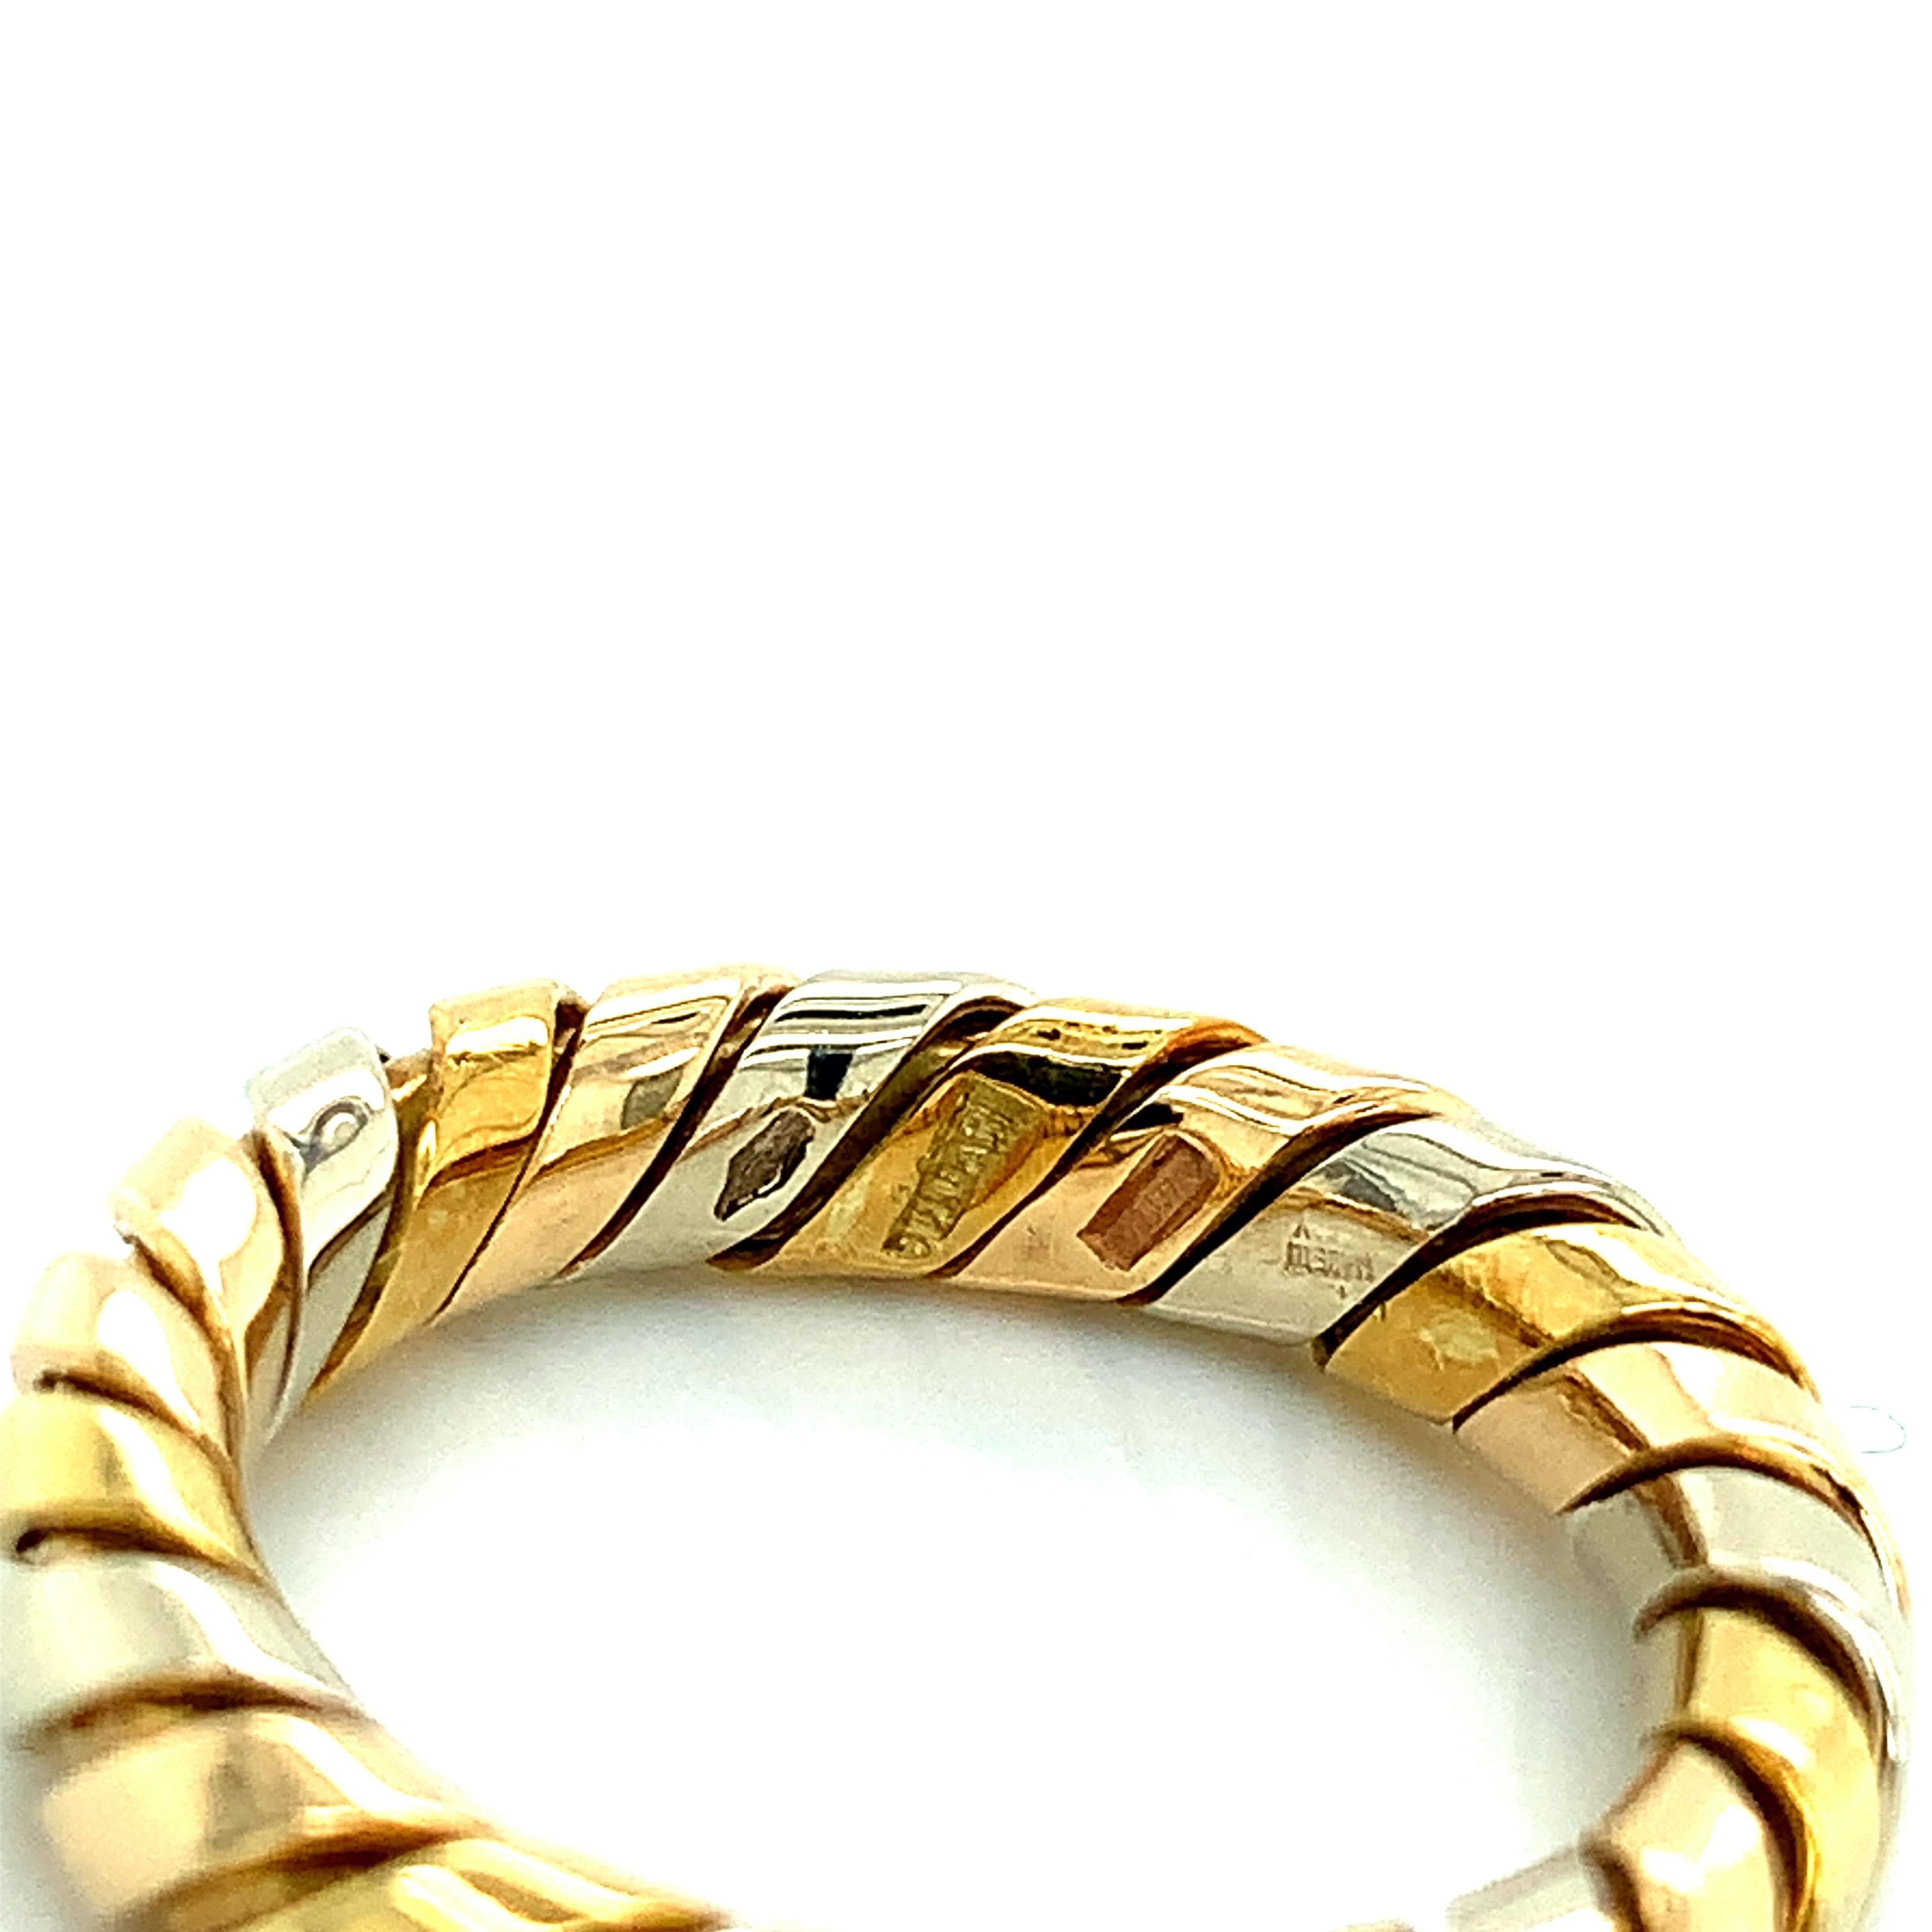 Bvlgari Gold Tubogas Ring In Excellent Condition For Sale In New York, NY